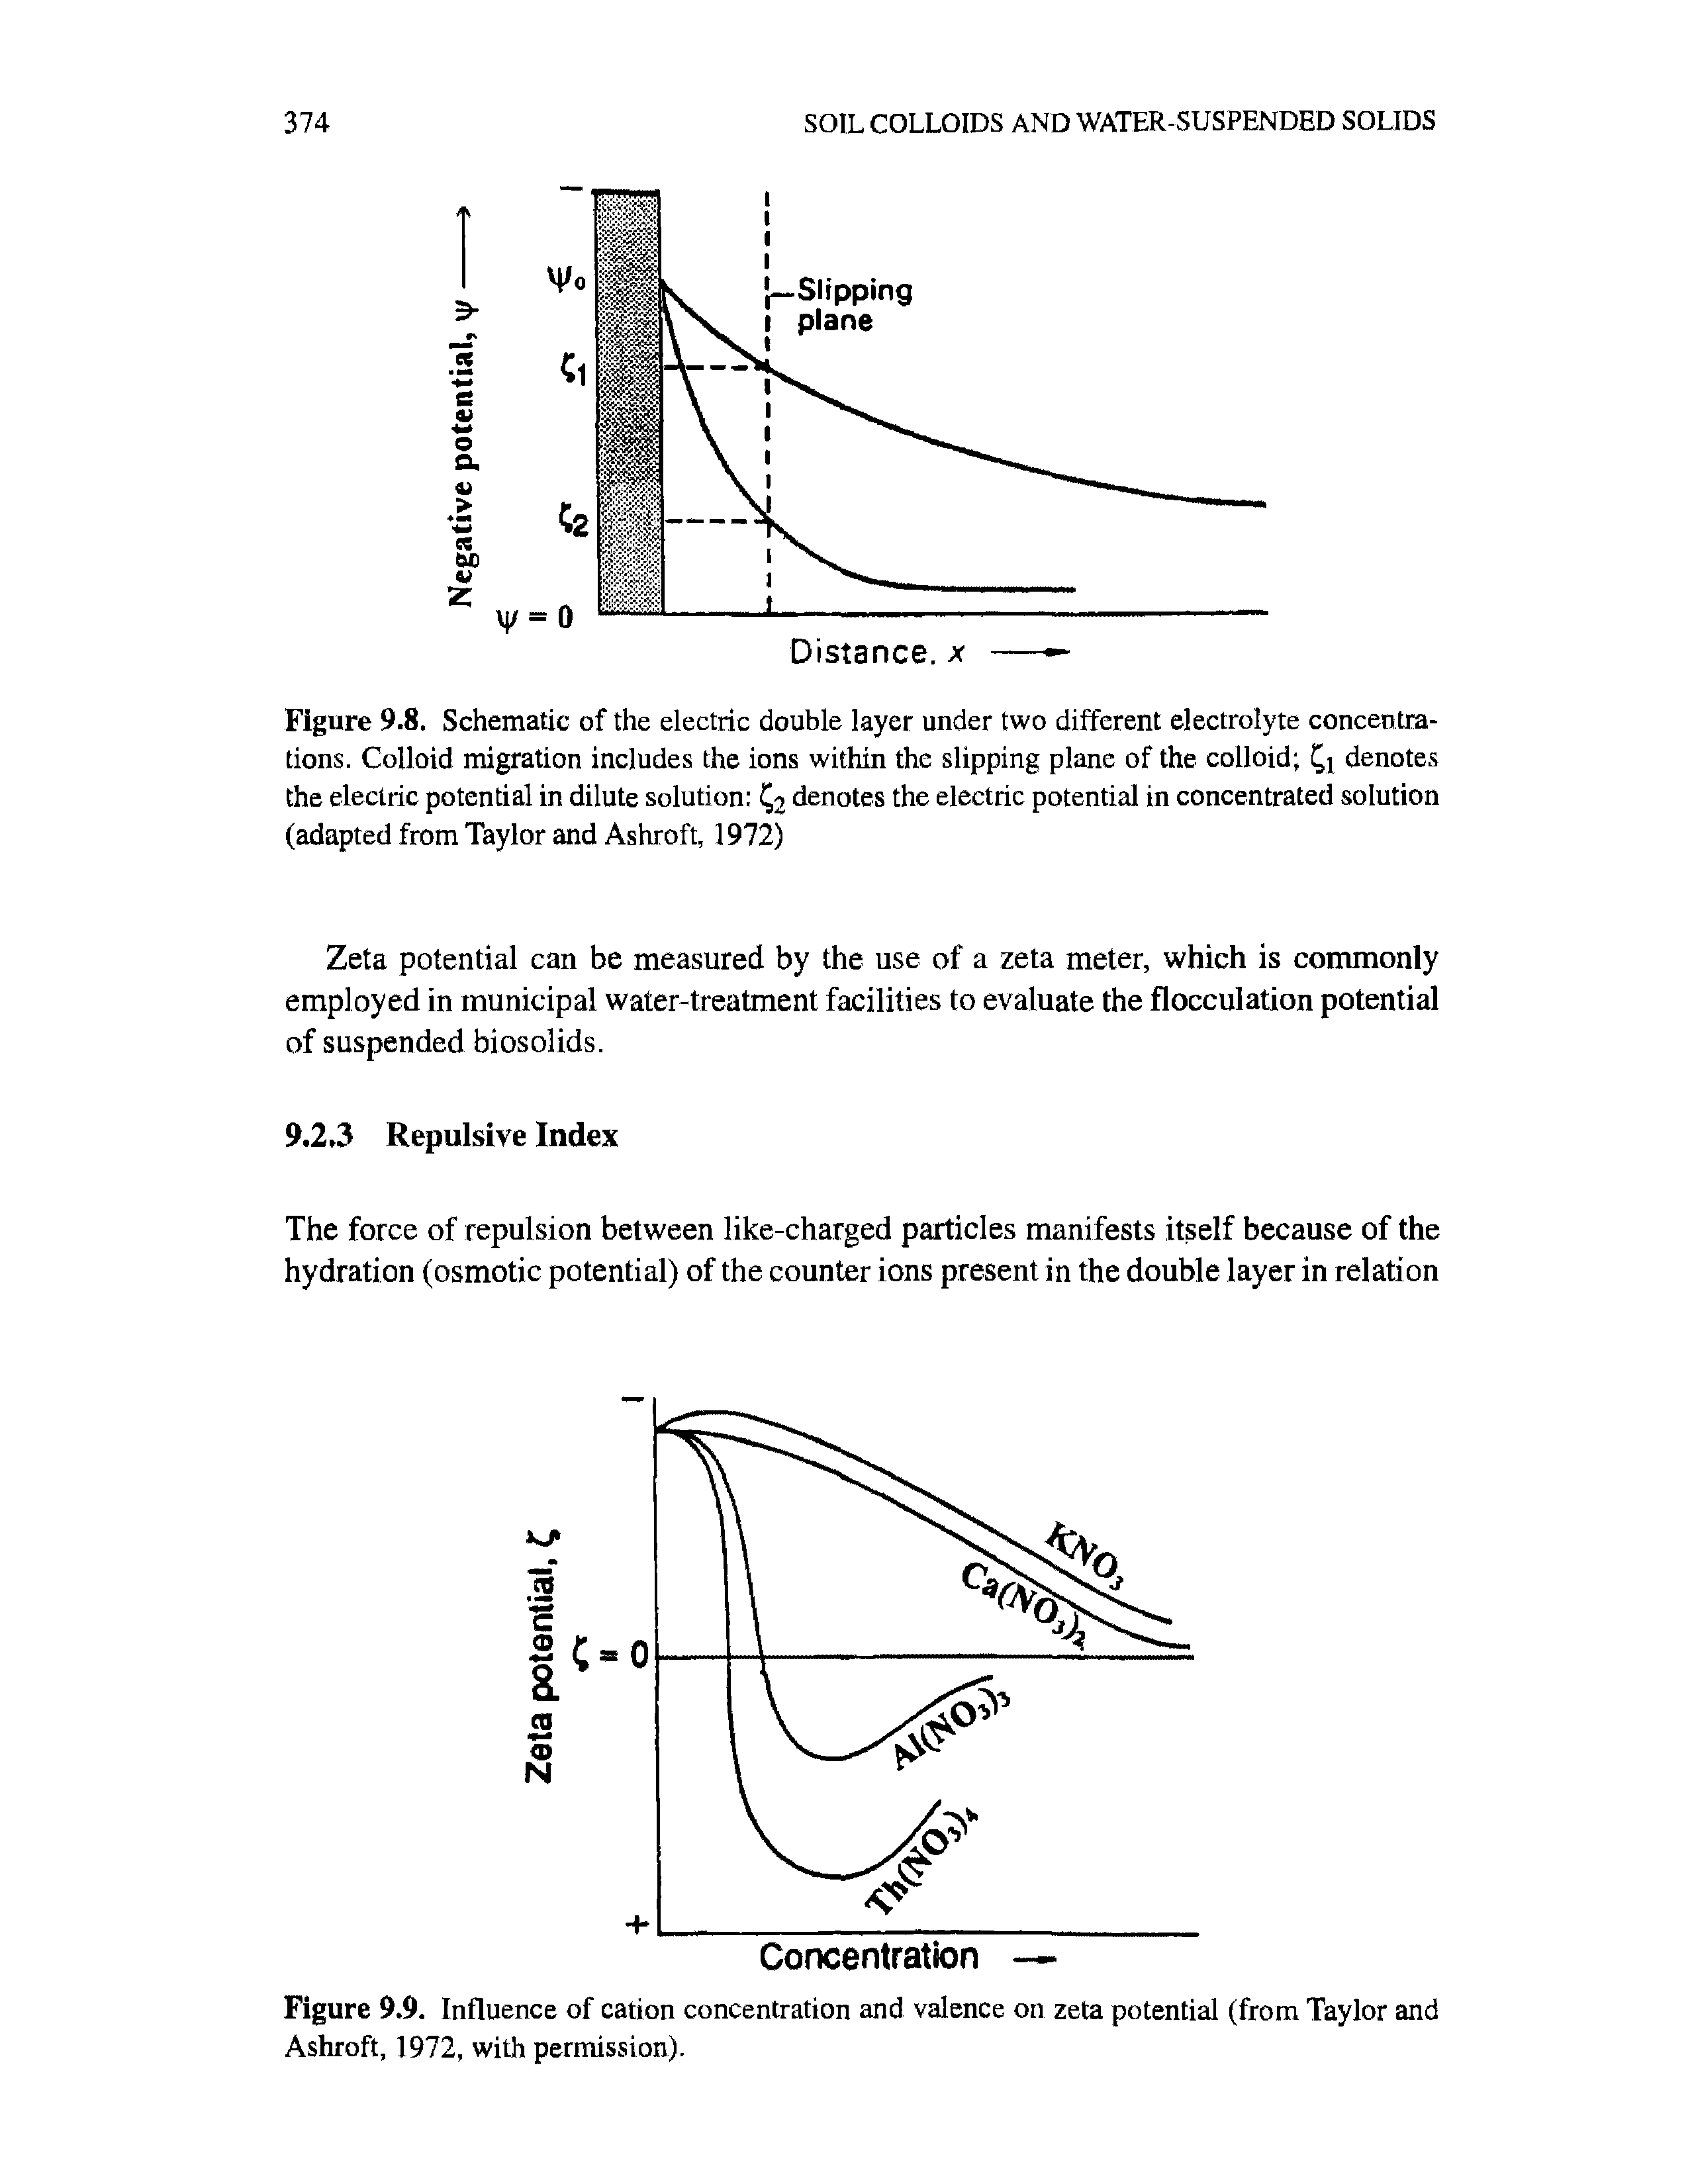 Figure 9.9. Influence of cation concentration and valence on zeta potential (from Taylor and Ashroft, 1972, with permission).